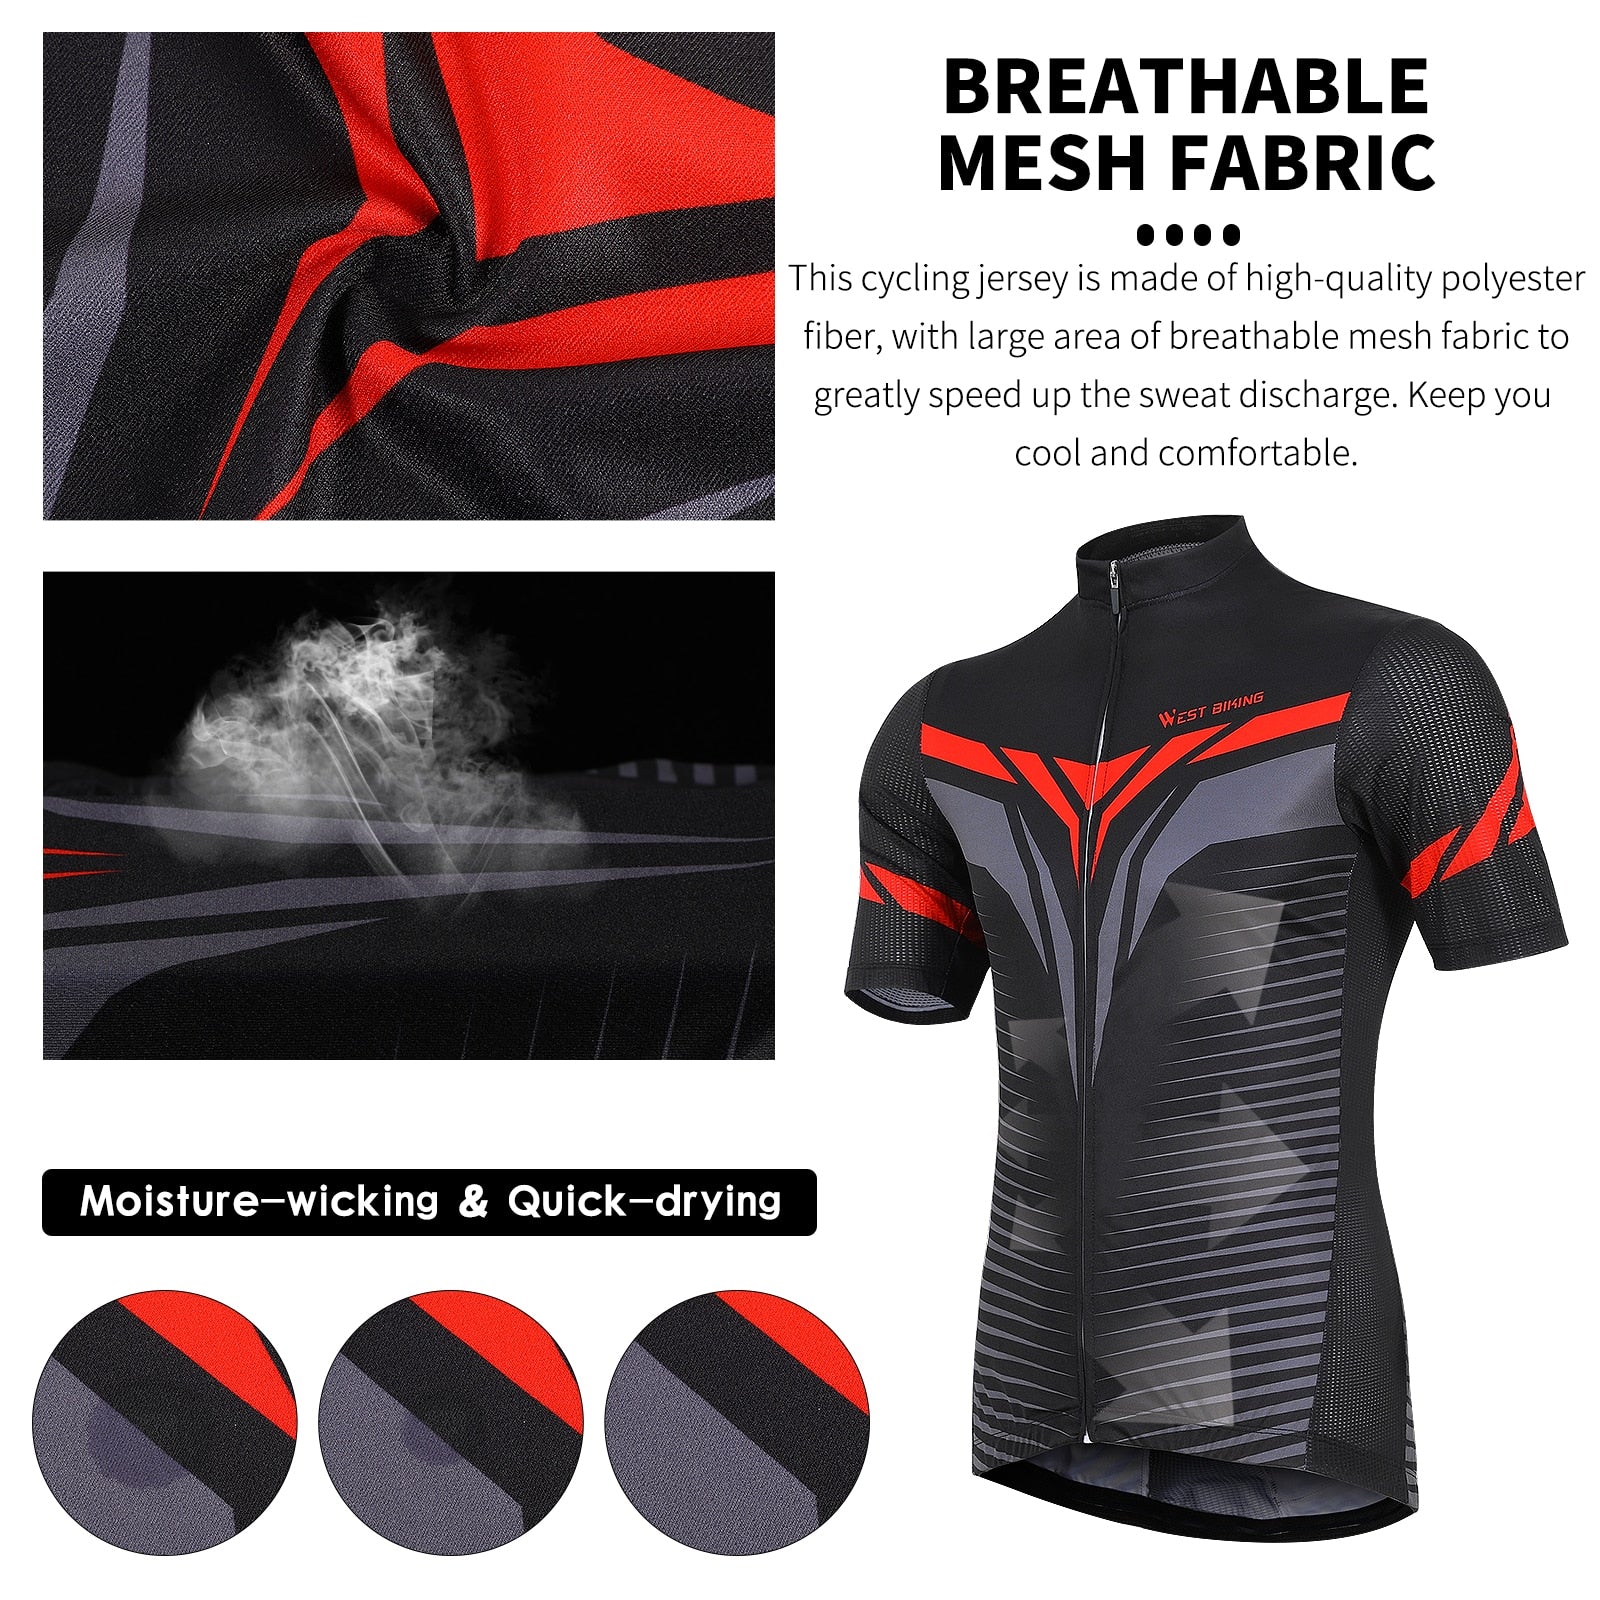 MTB Cycling Jersey 2021 Summer Pro Team Sport Shirts Top Short Sleeve Bike Riding Wear Breathable Bicycle Clothing